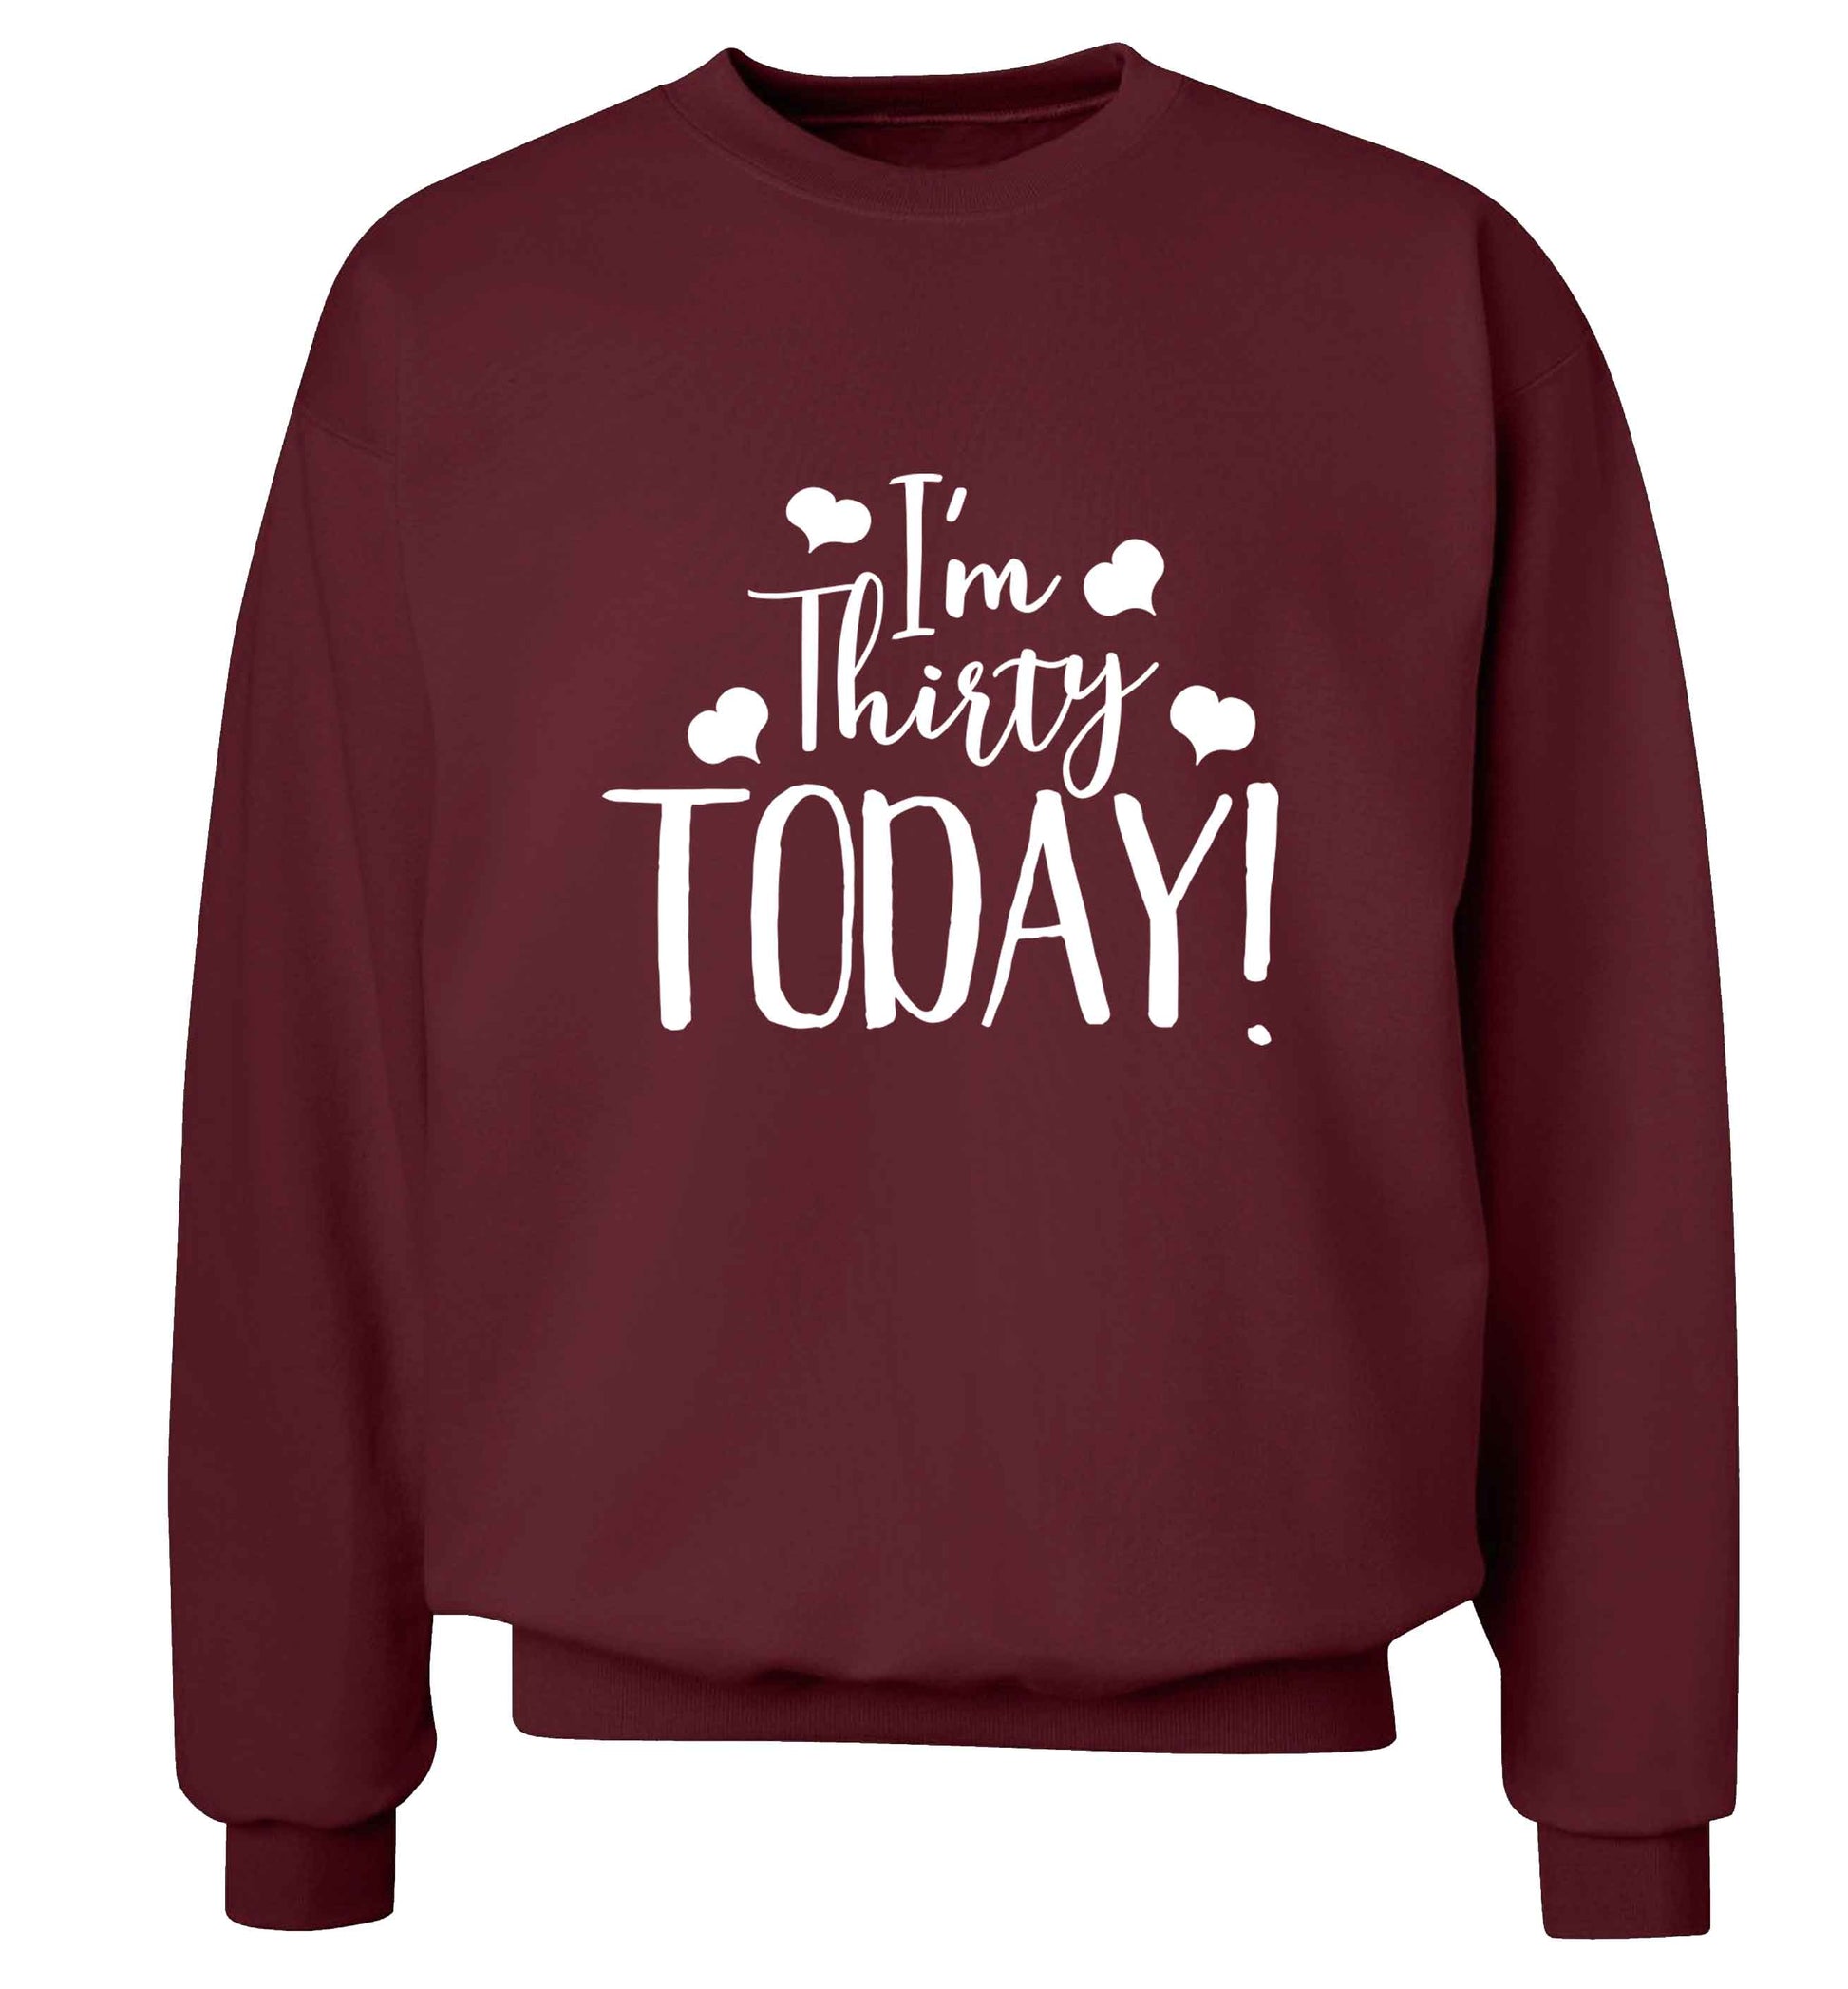 I'm thirty today! adult's unisex maroon sweater 2XL